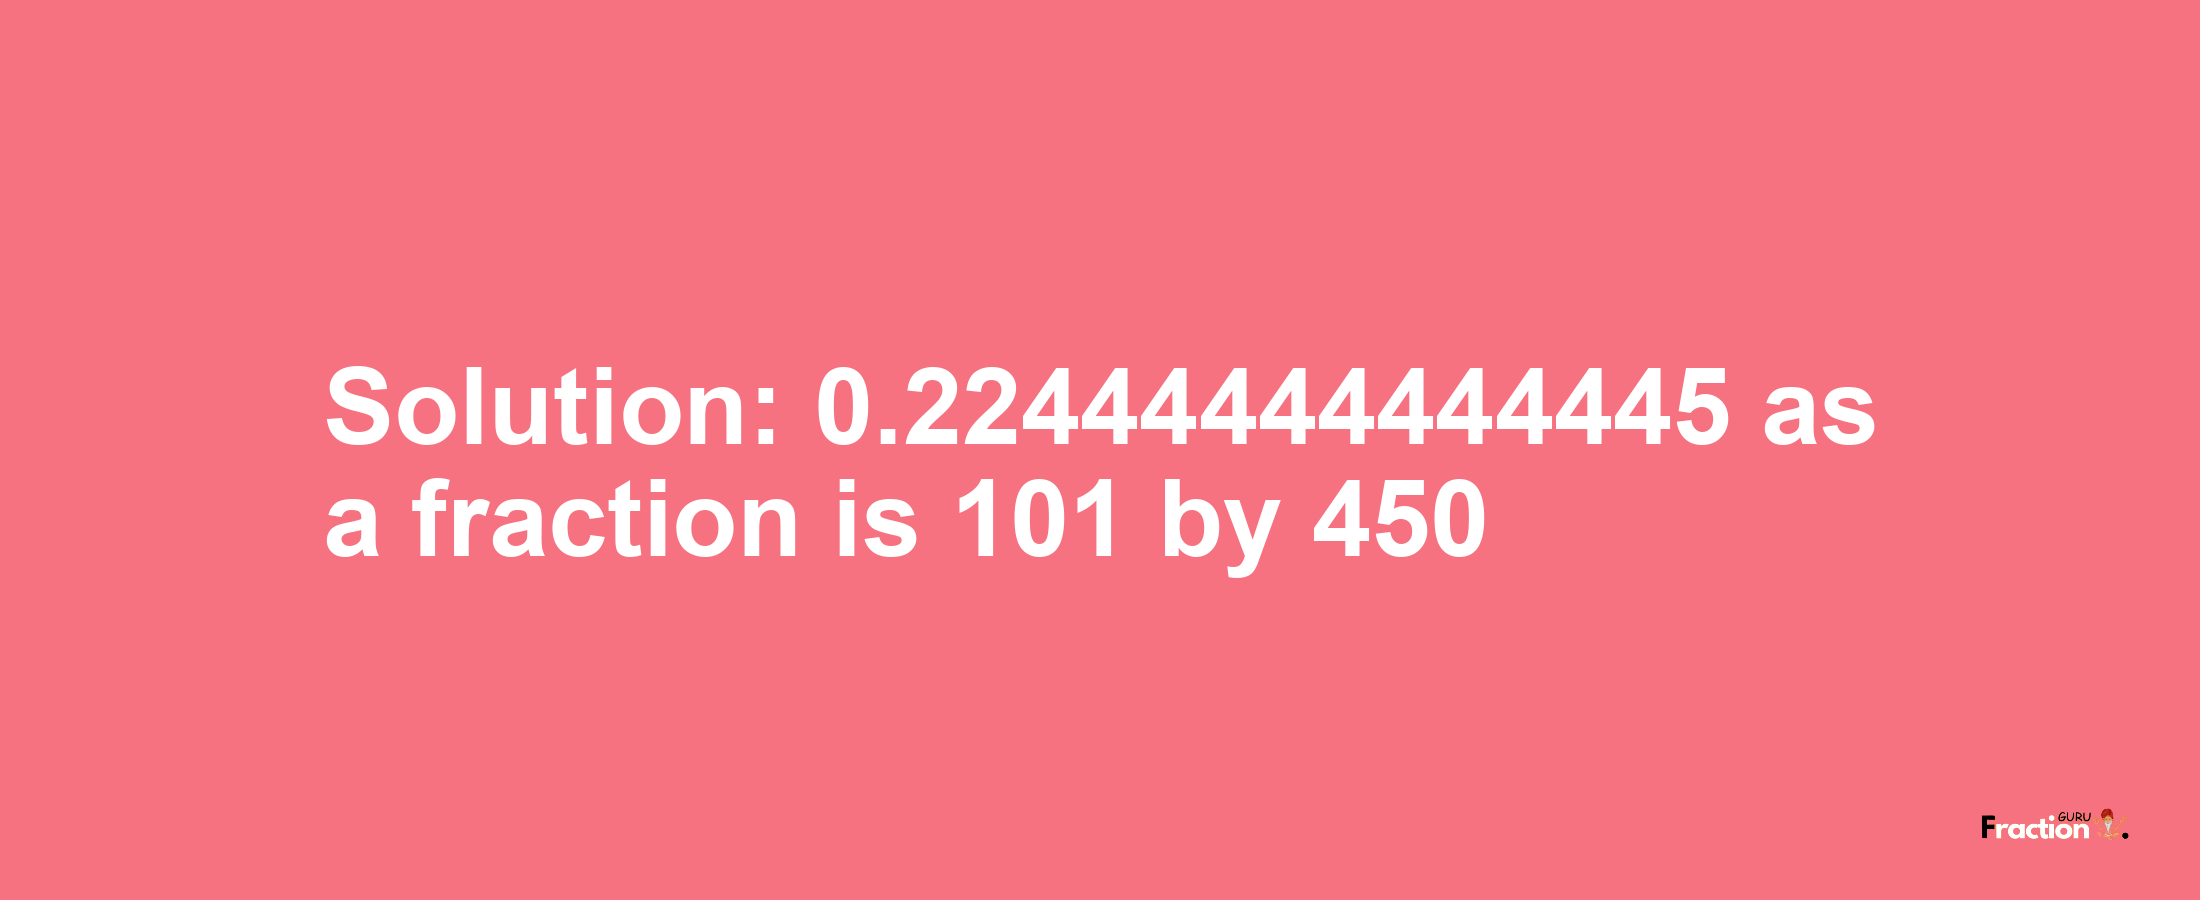 Solution:0.22444444444445 as a fraction is 101/450